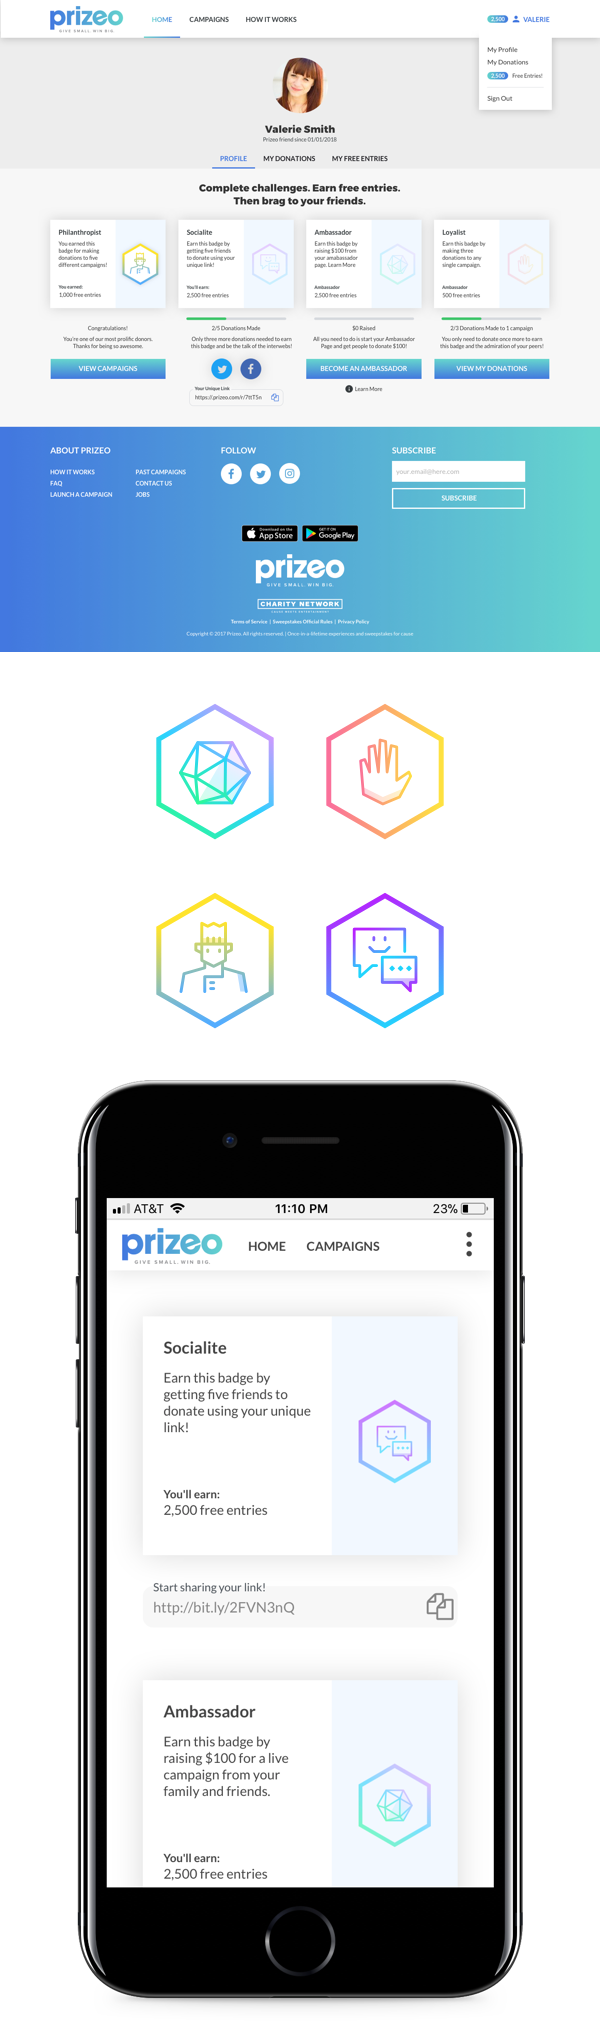 Prizeo home page redesign screens.